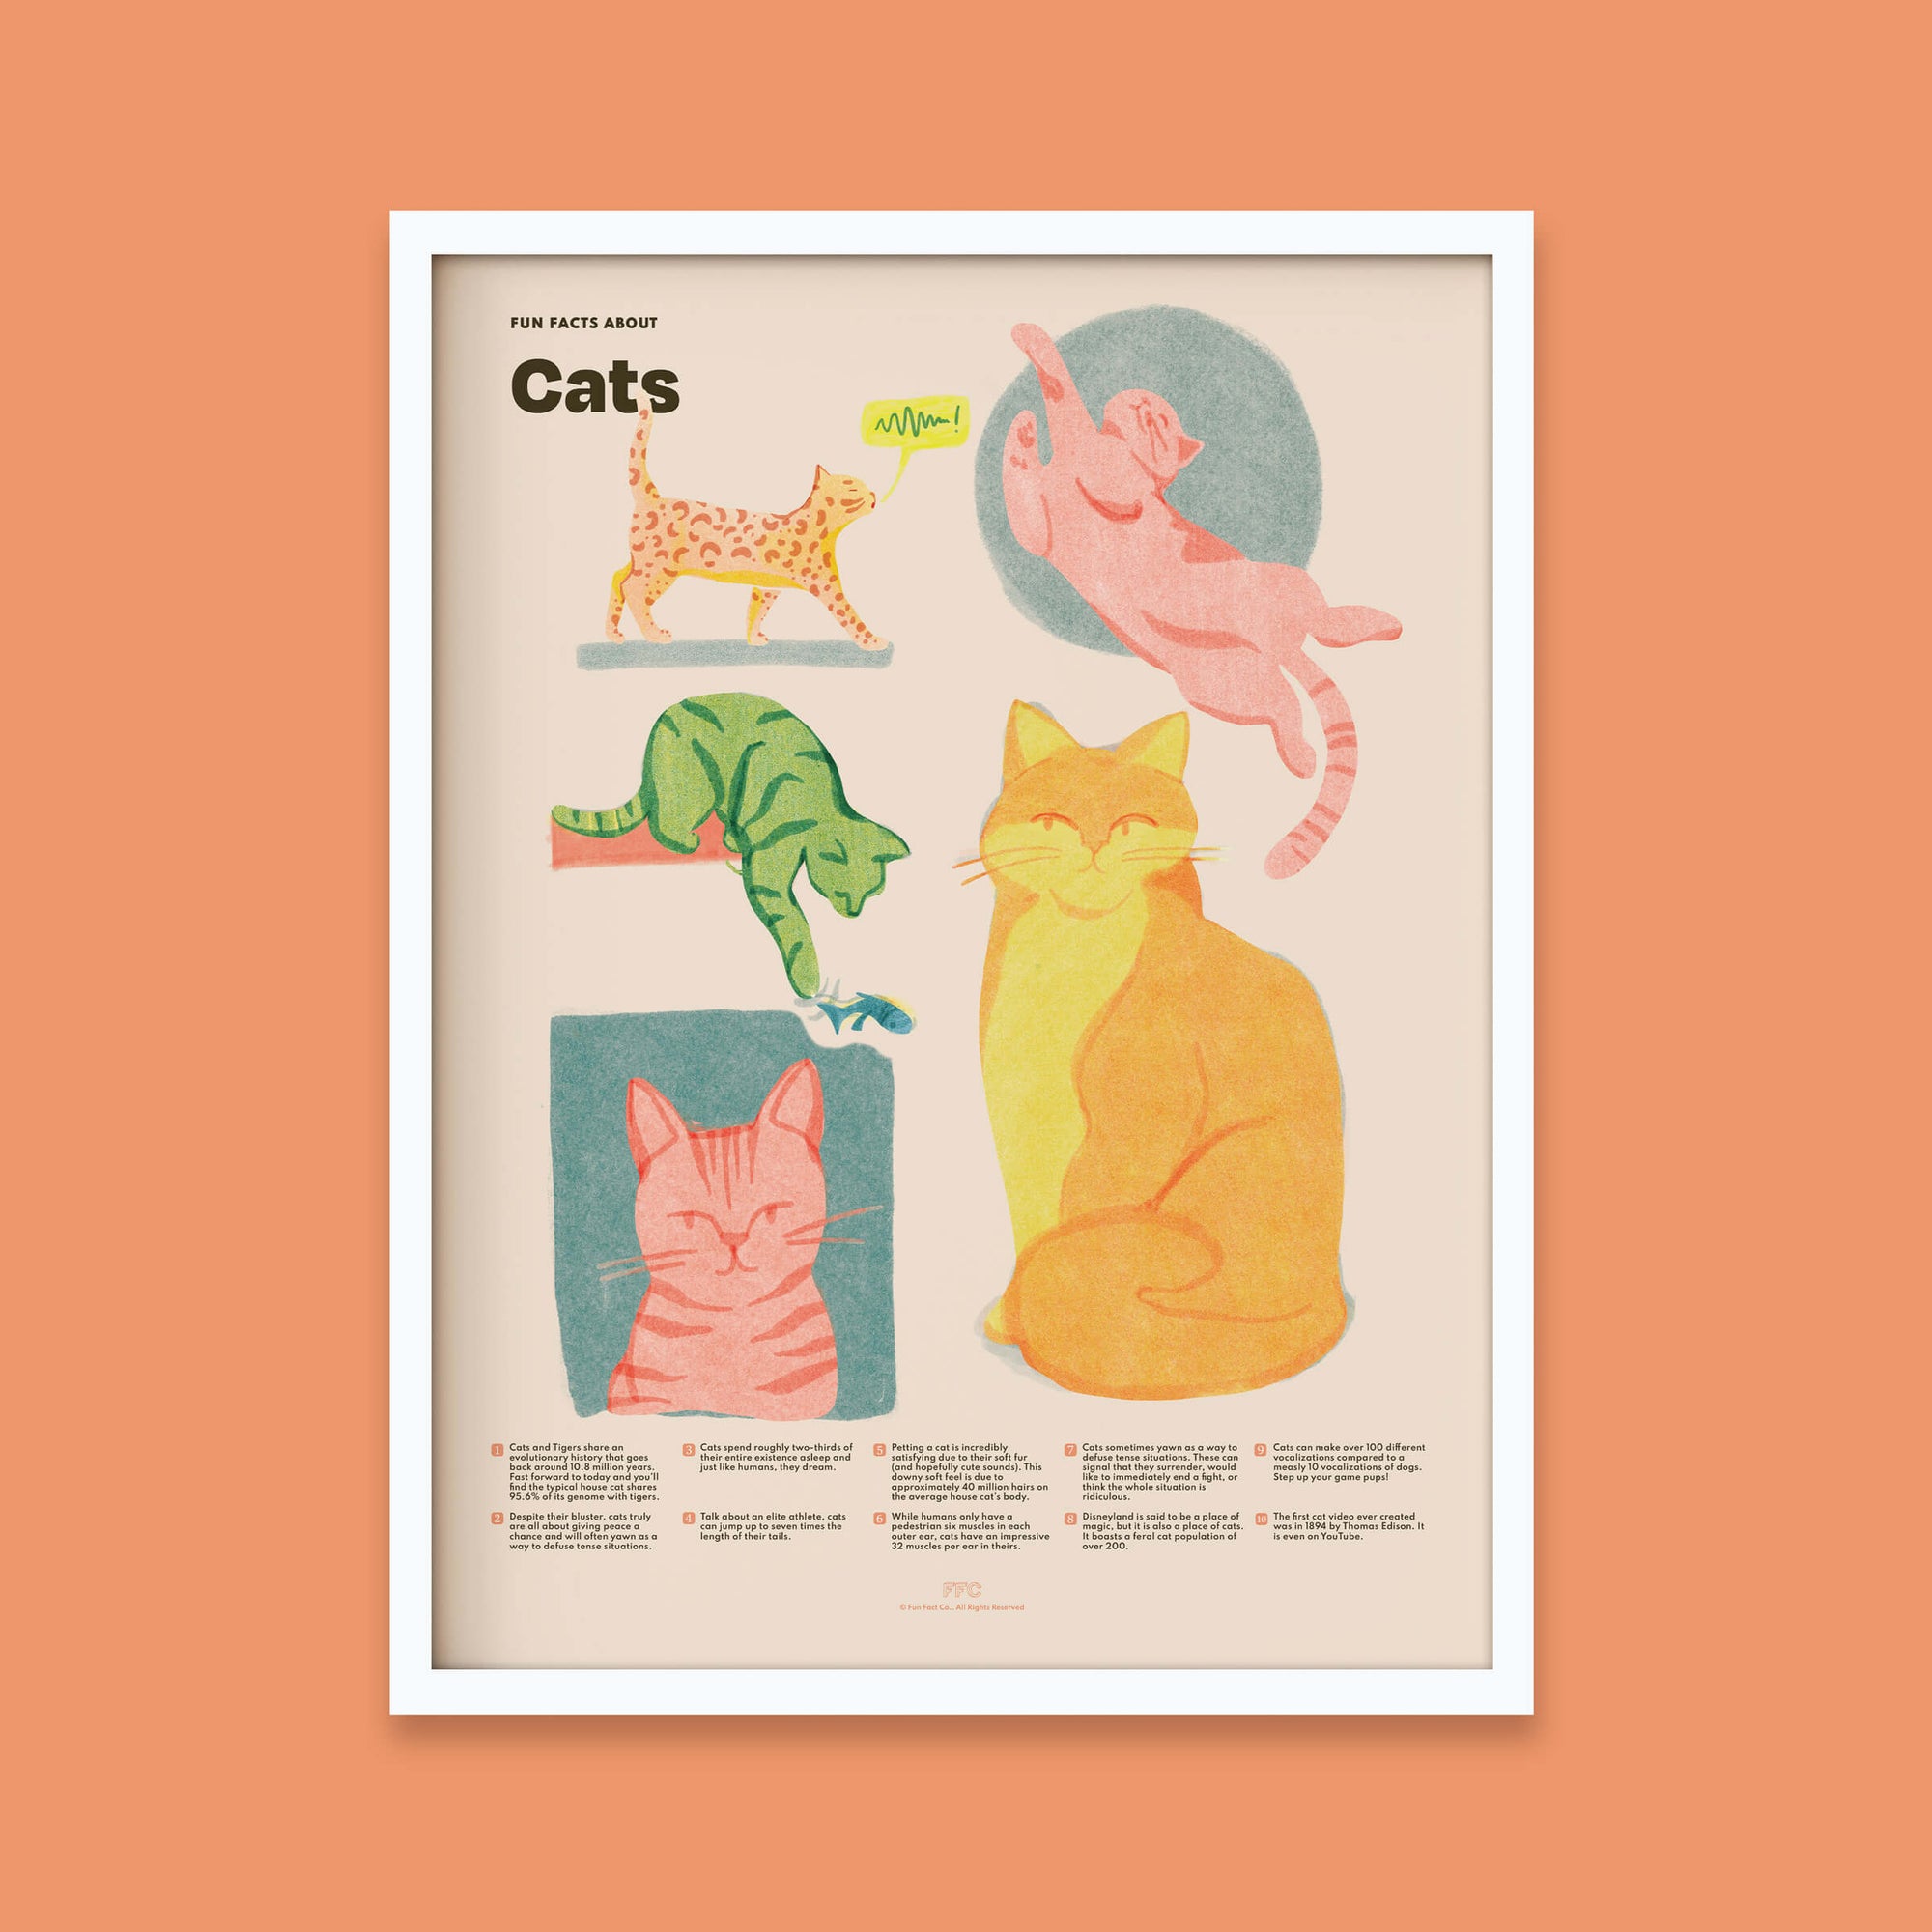 Cat Fun Facts Print, Educational Illustrated Poster by Fun Fact Co - White Frame